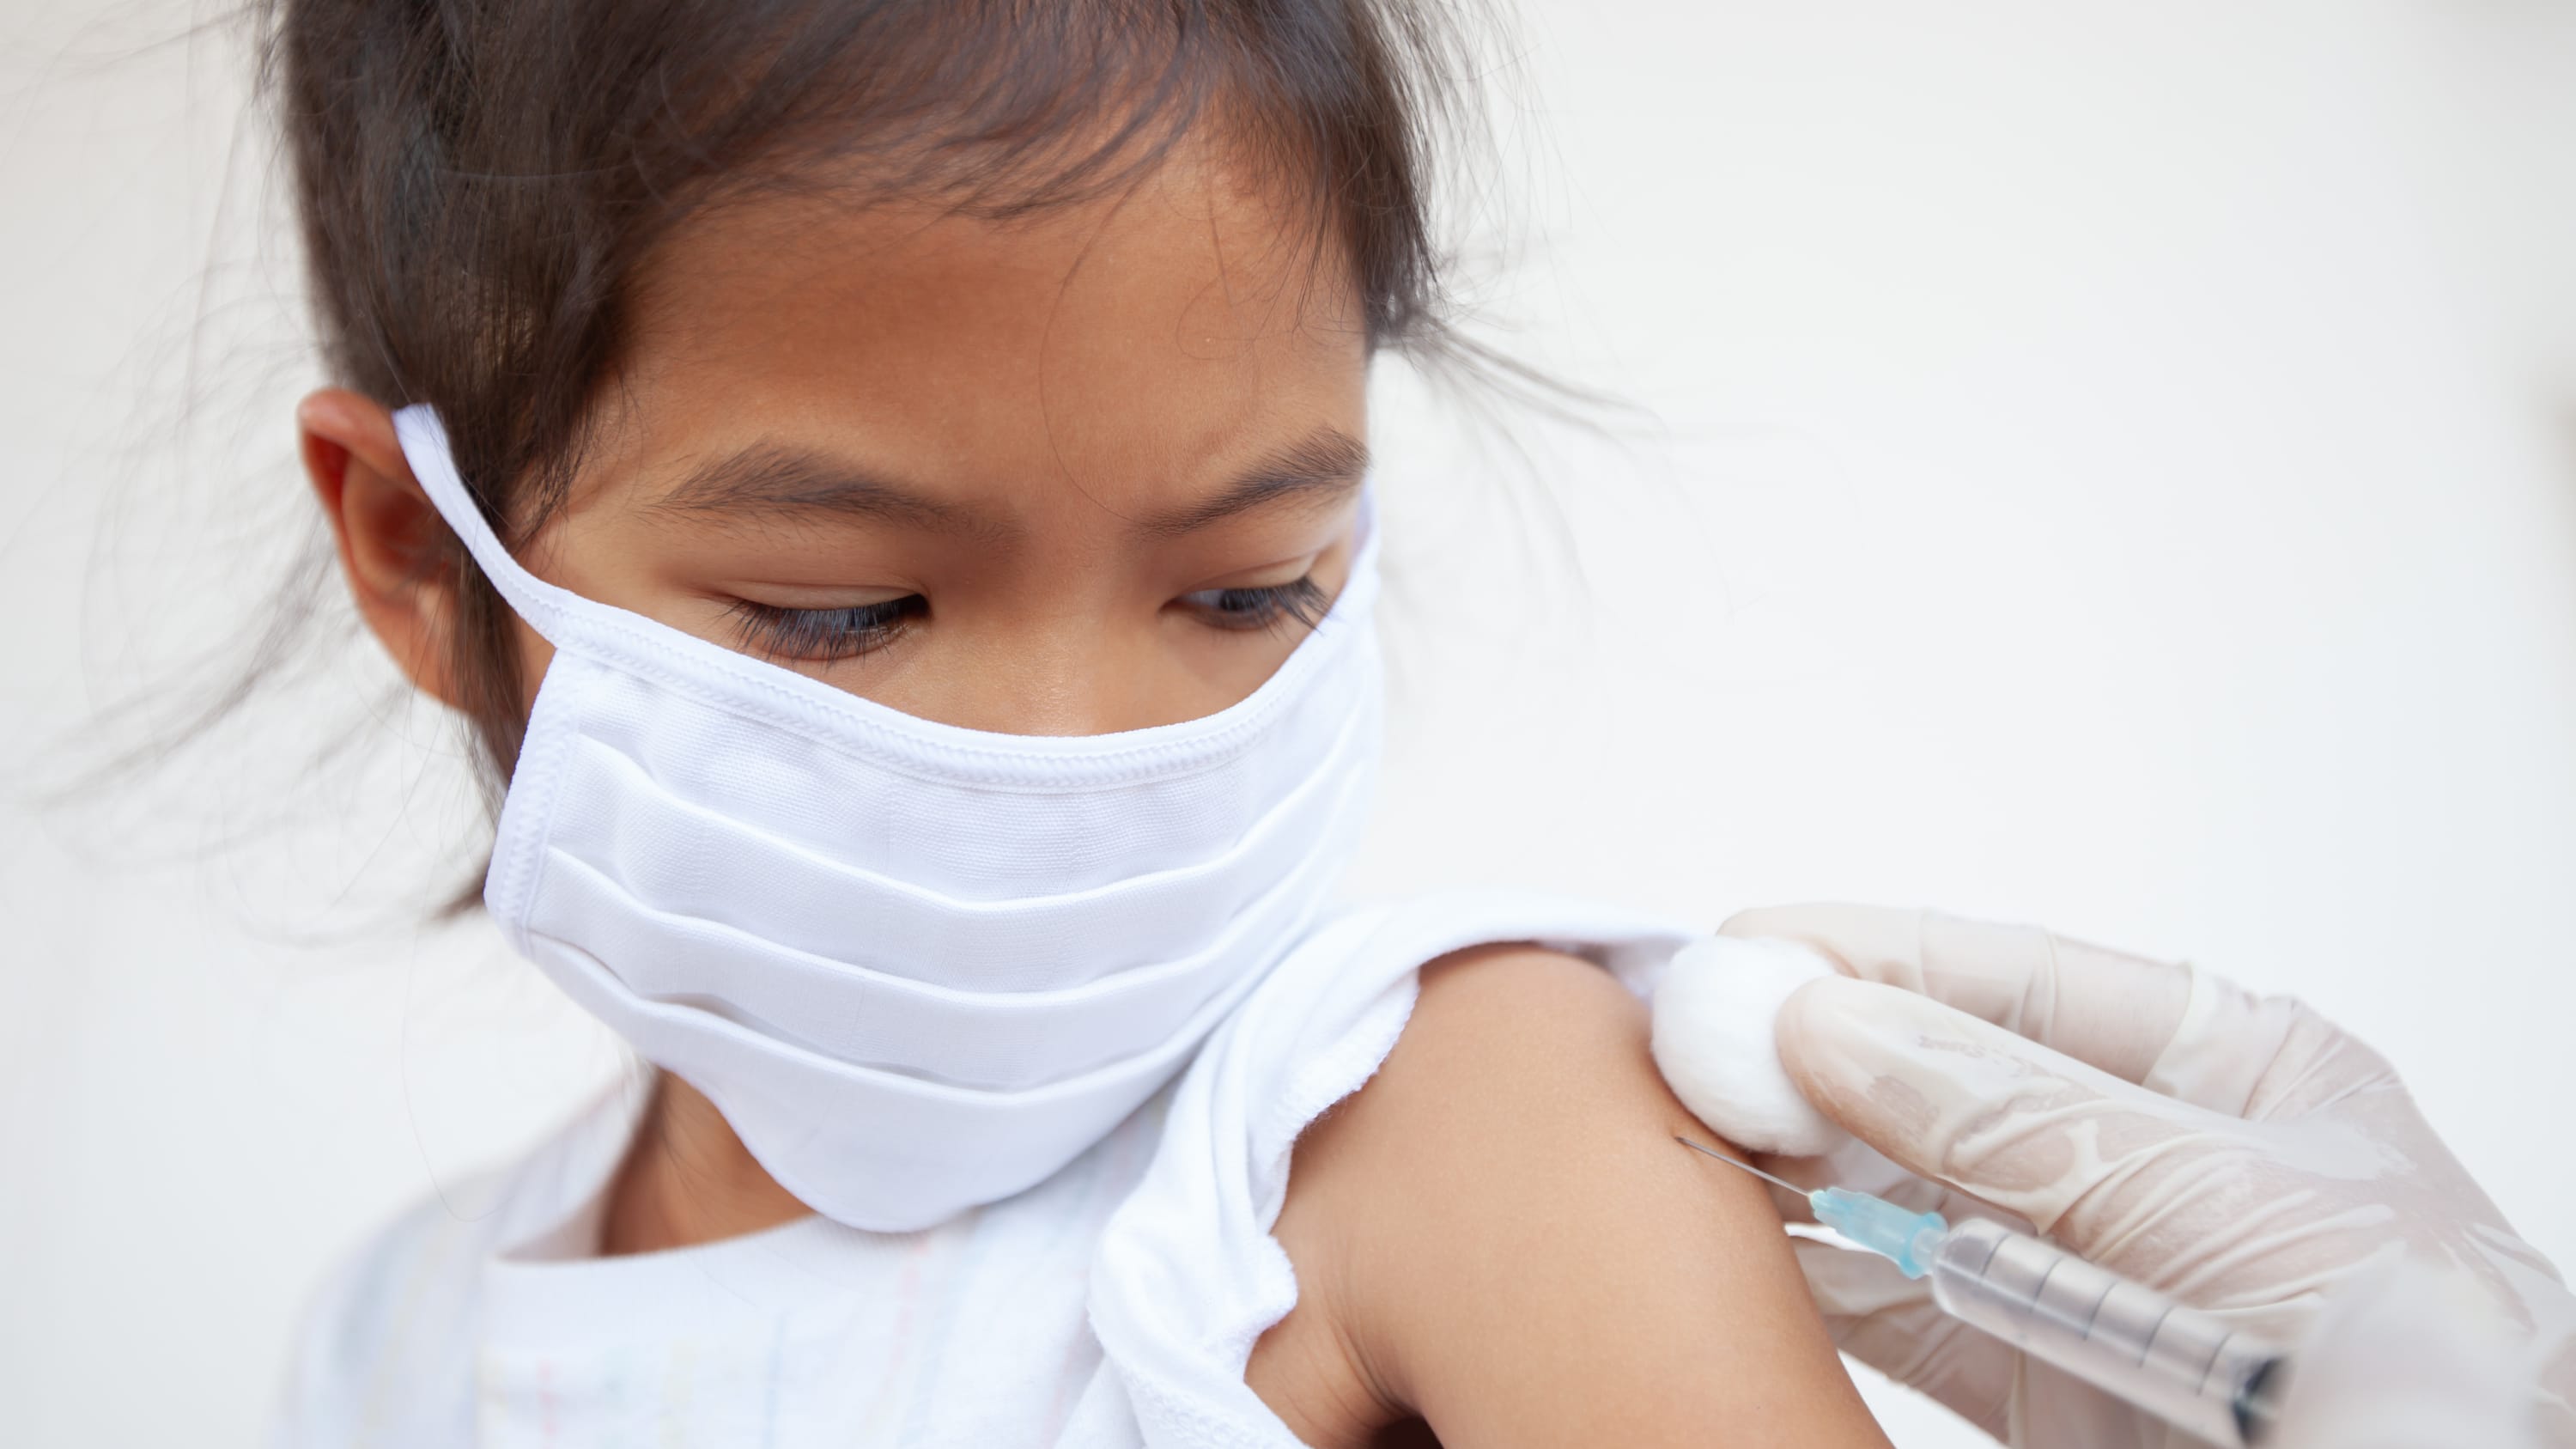 girl receiving a vaccine, potentially for COVID-19